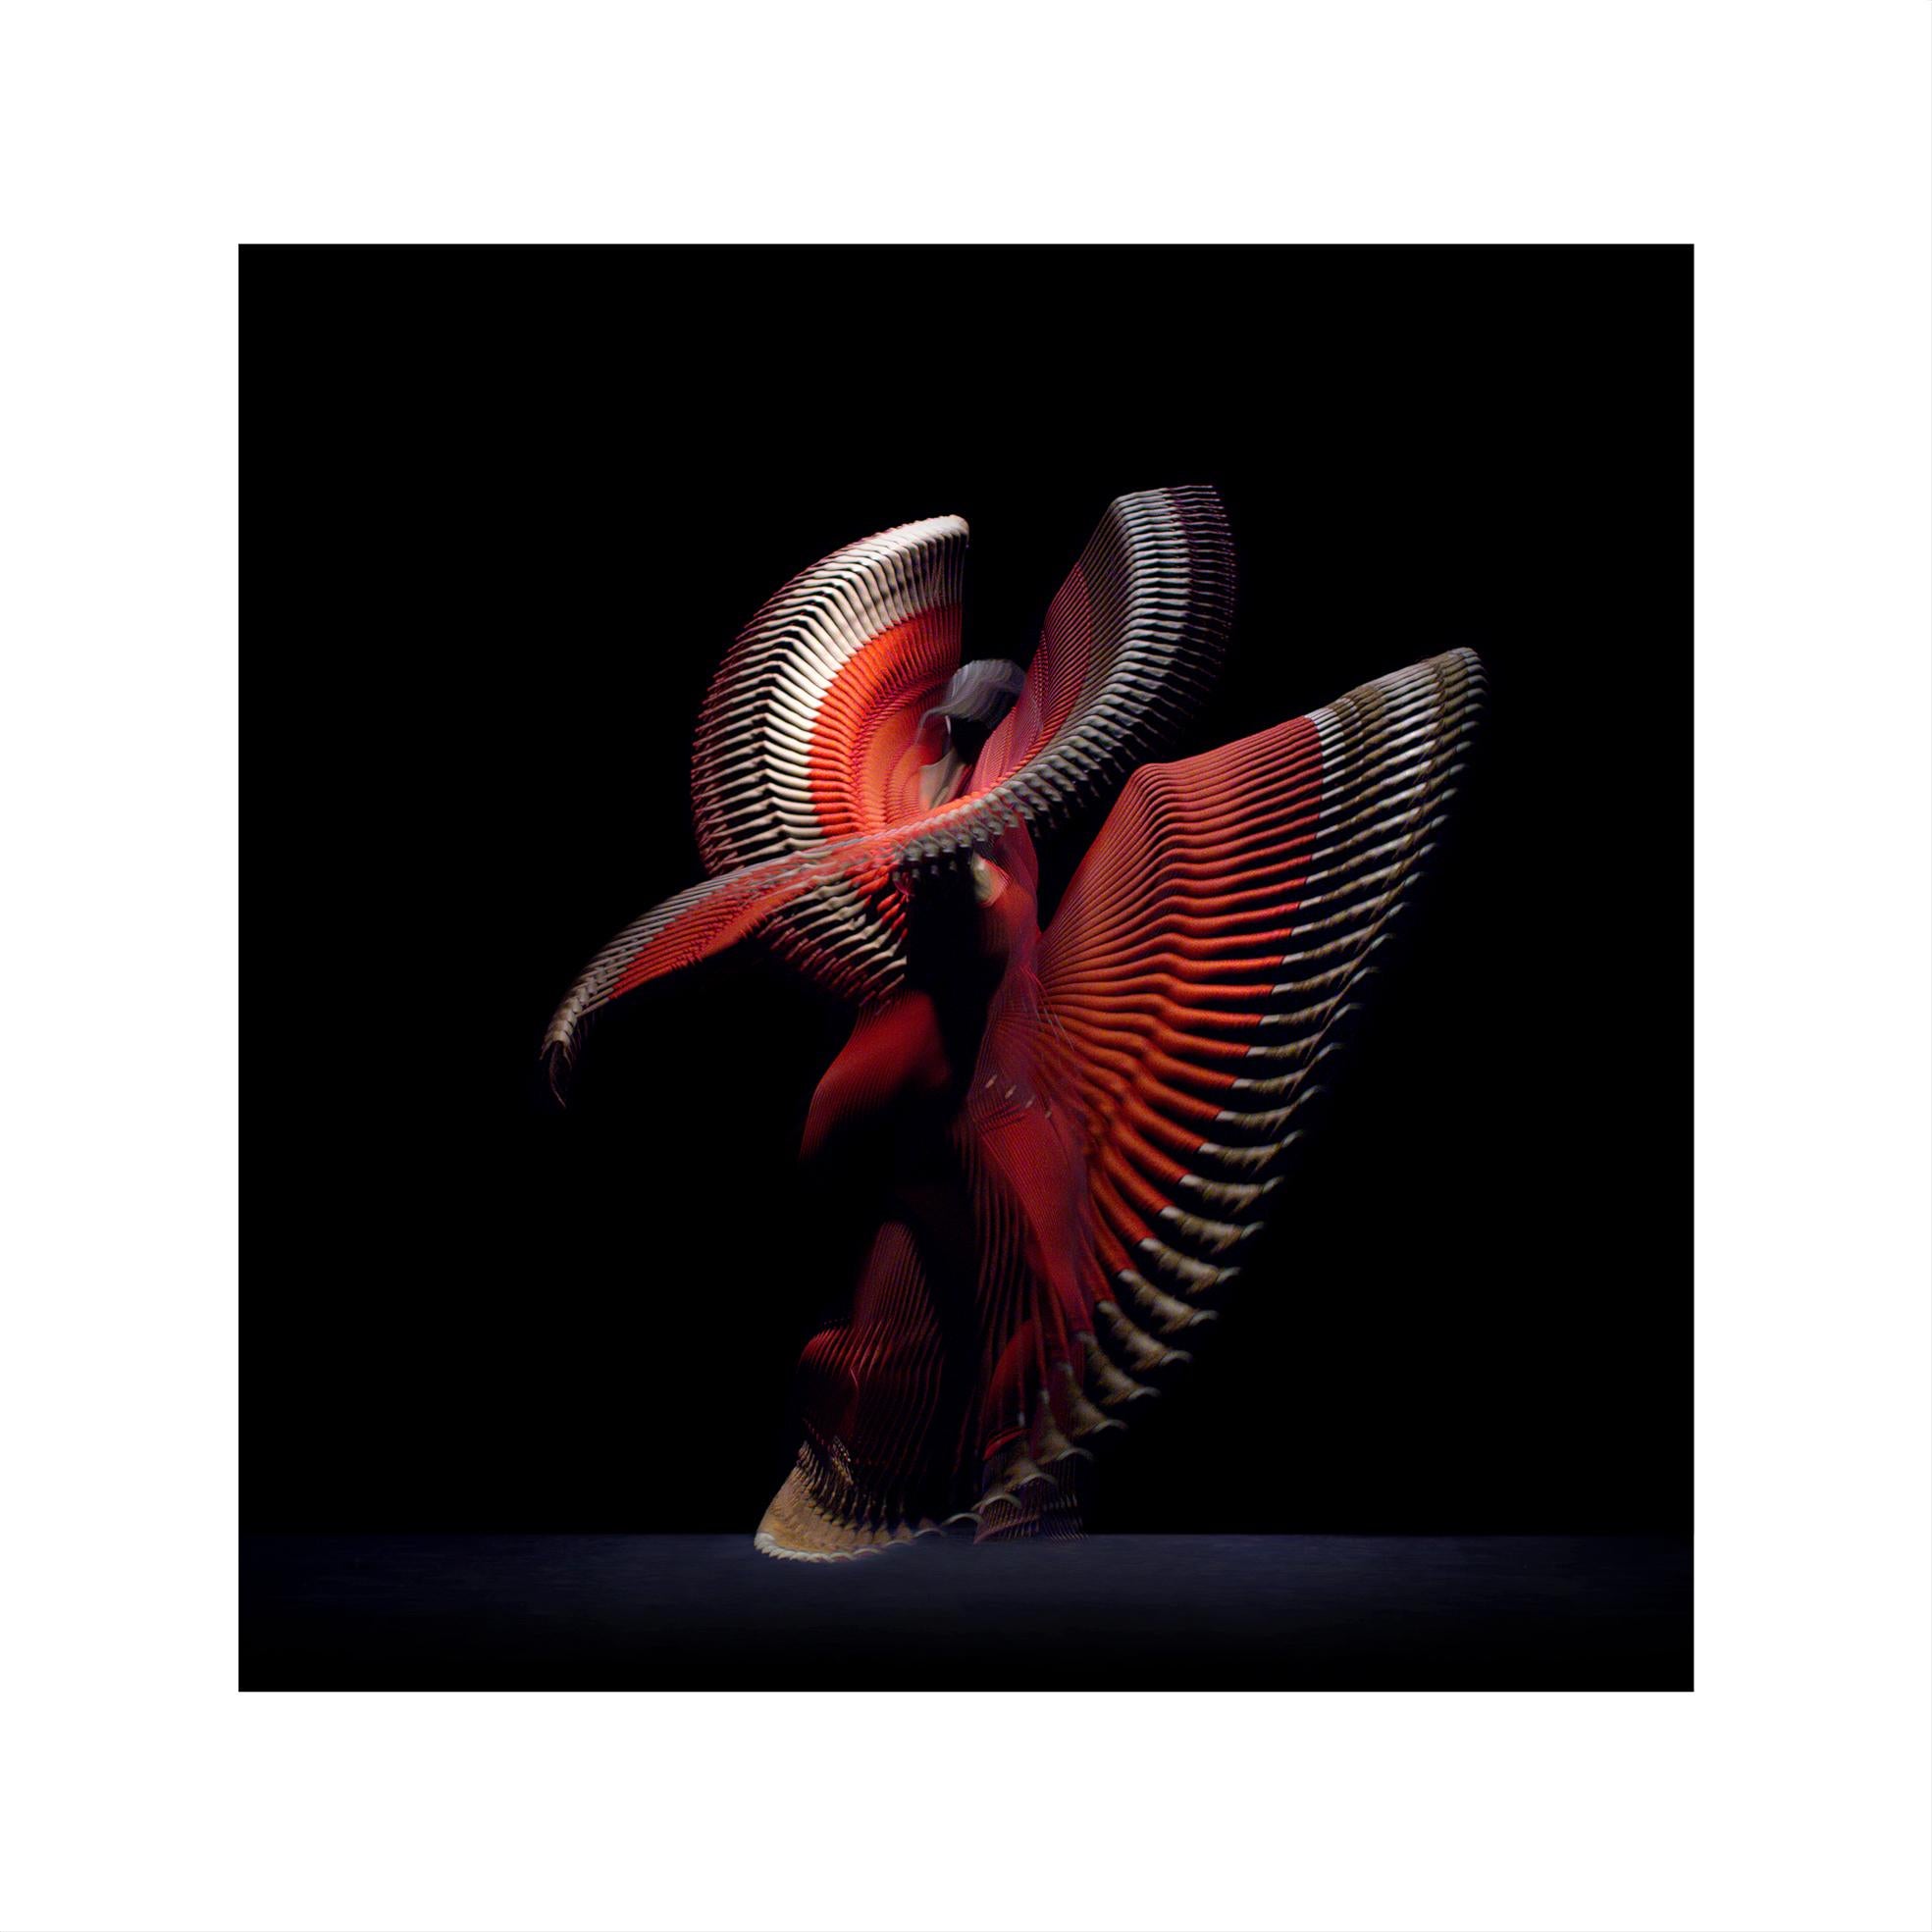 Abstract Dancers, Red 7, 2019 by Giles Revell - Photography, Print, Ballet